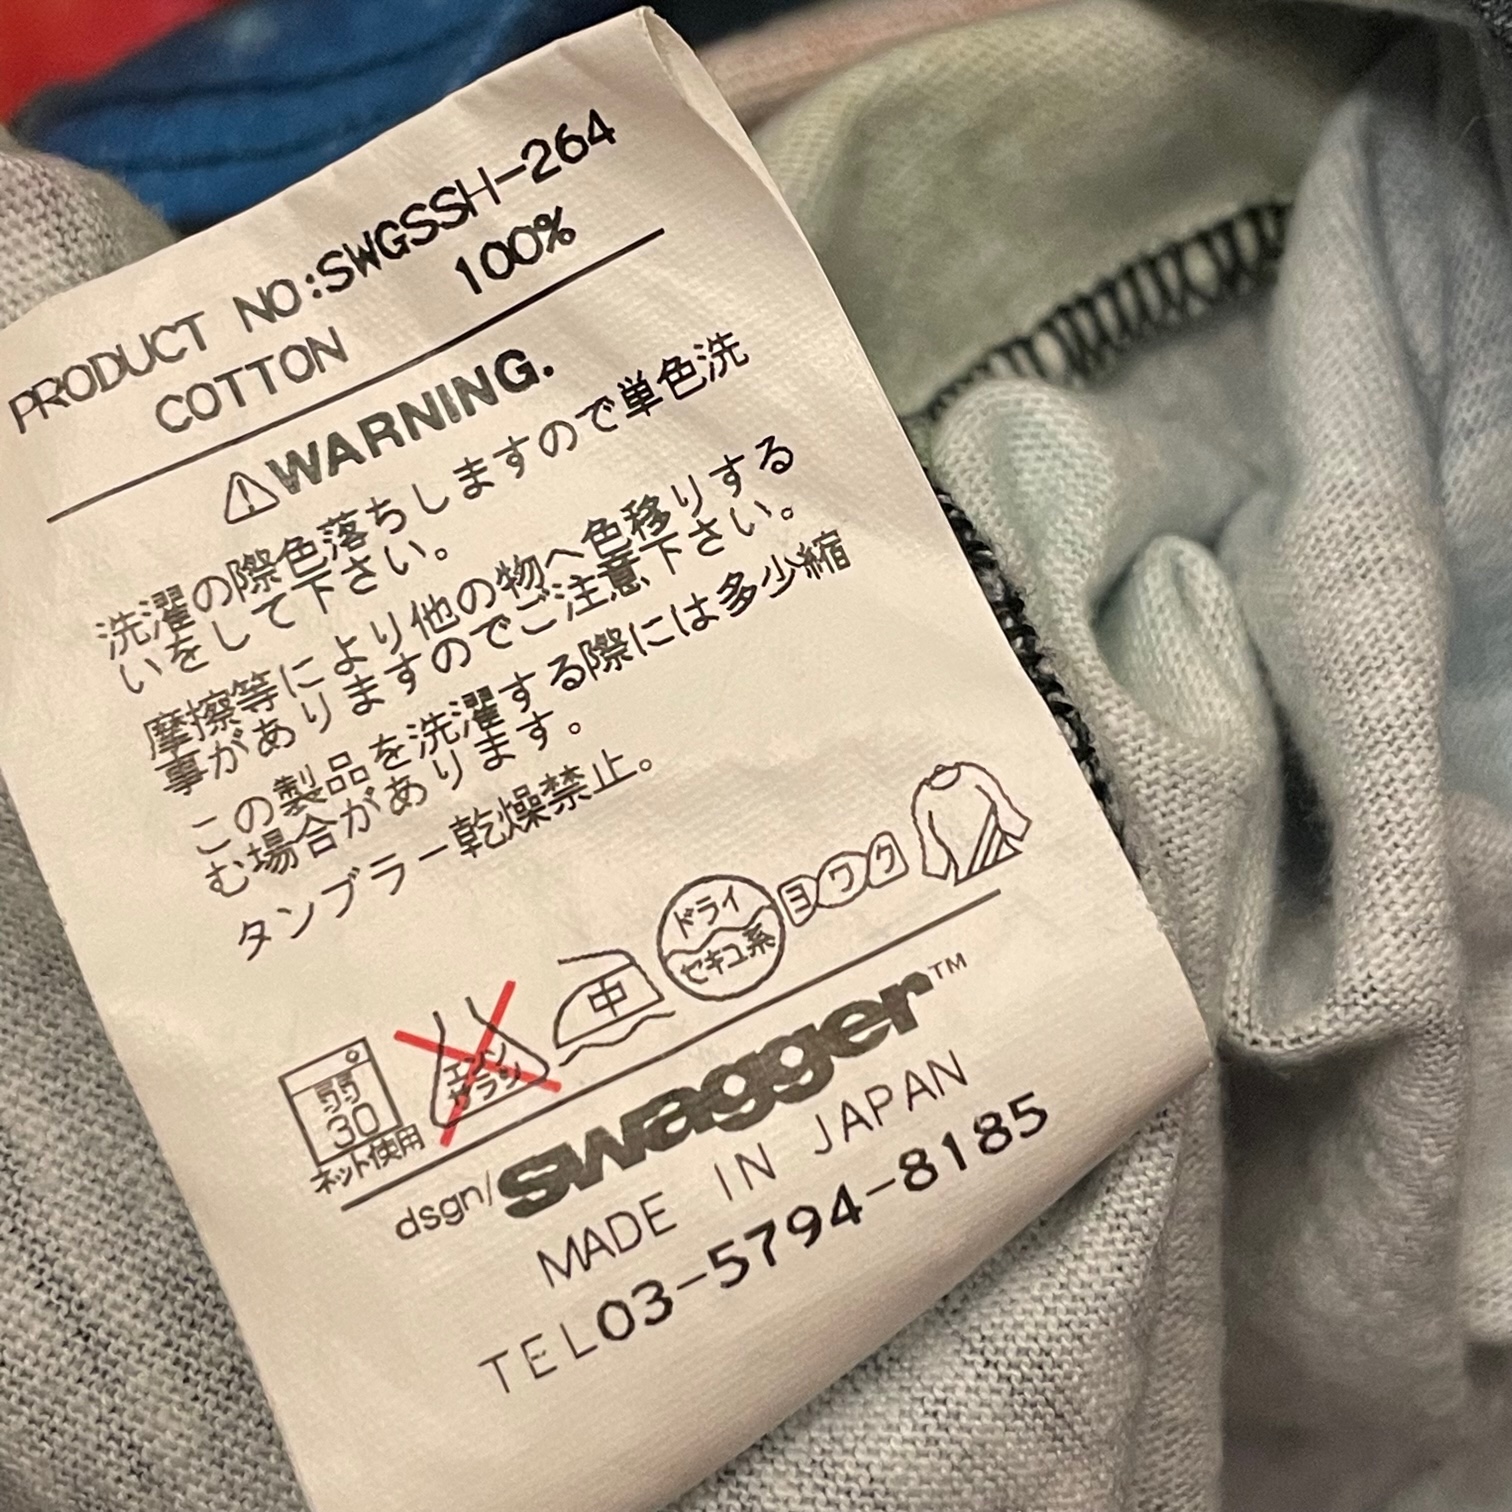 swagger 激レア 希少 Tシャツ